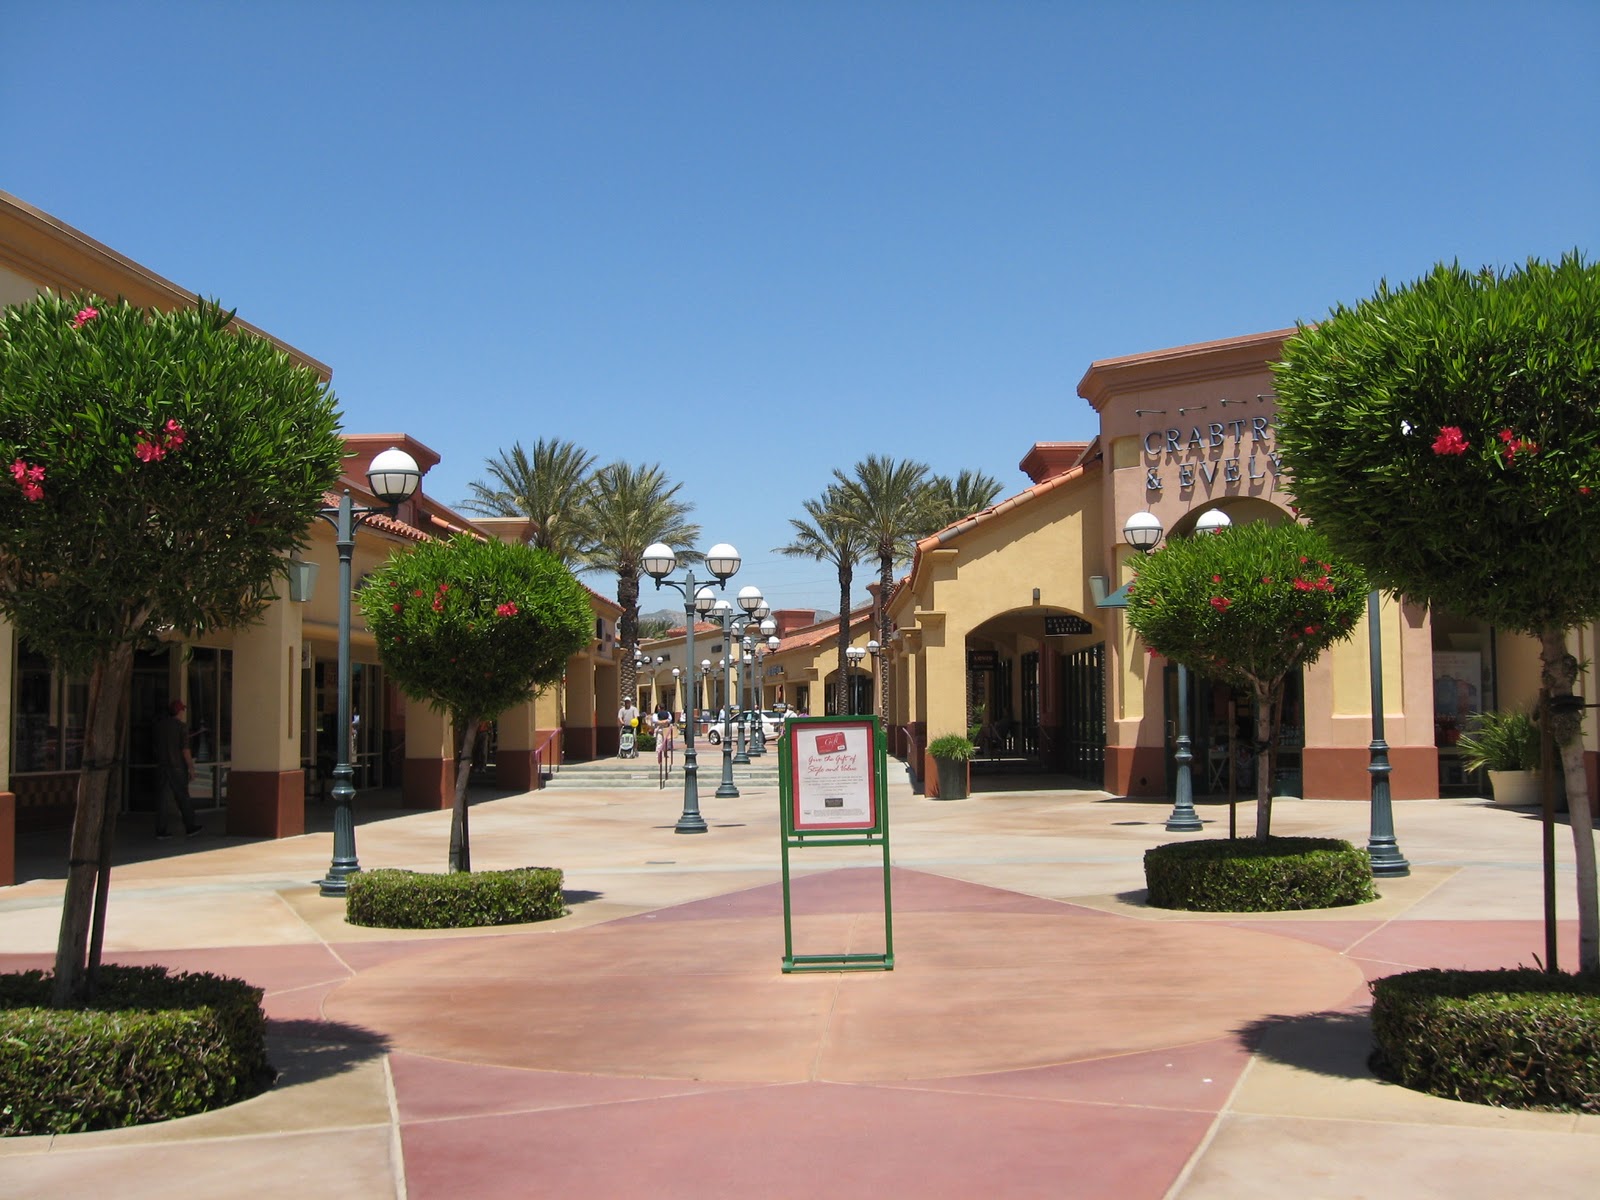 Fifties World: Cabazon Outlet & Desert Hills Premium Outlet Palm Springs